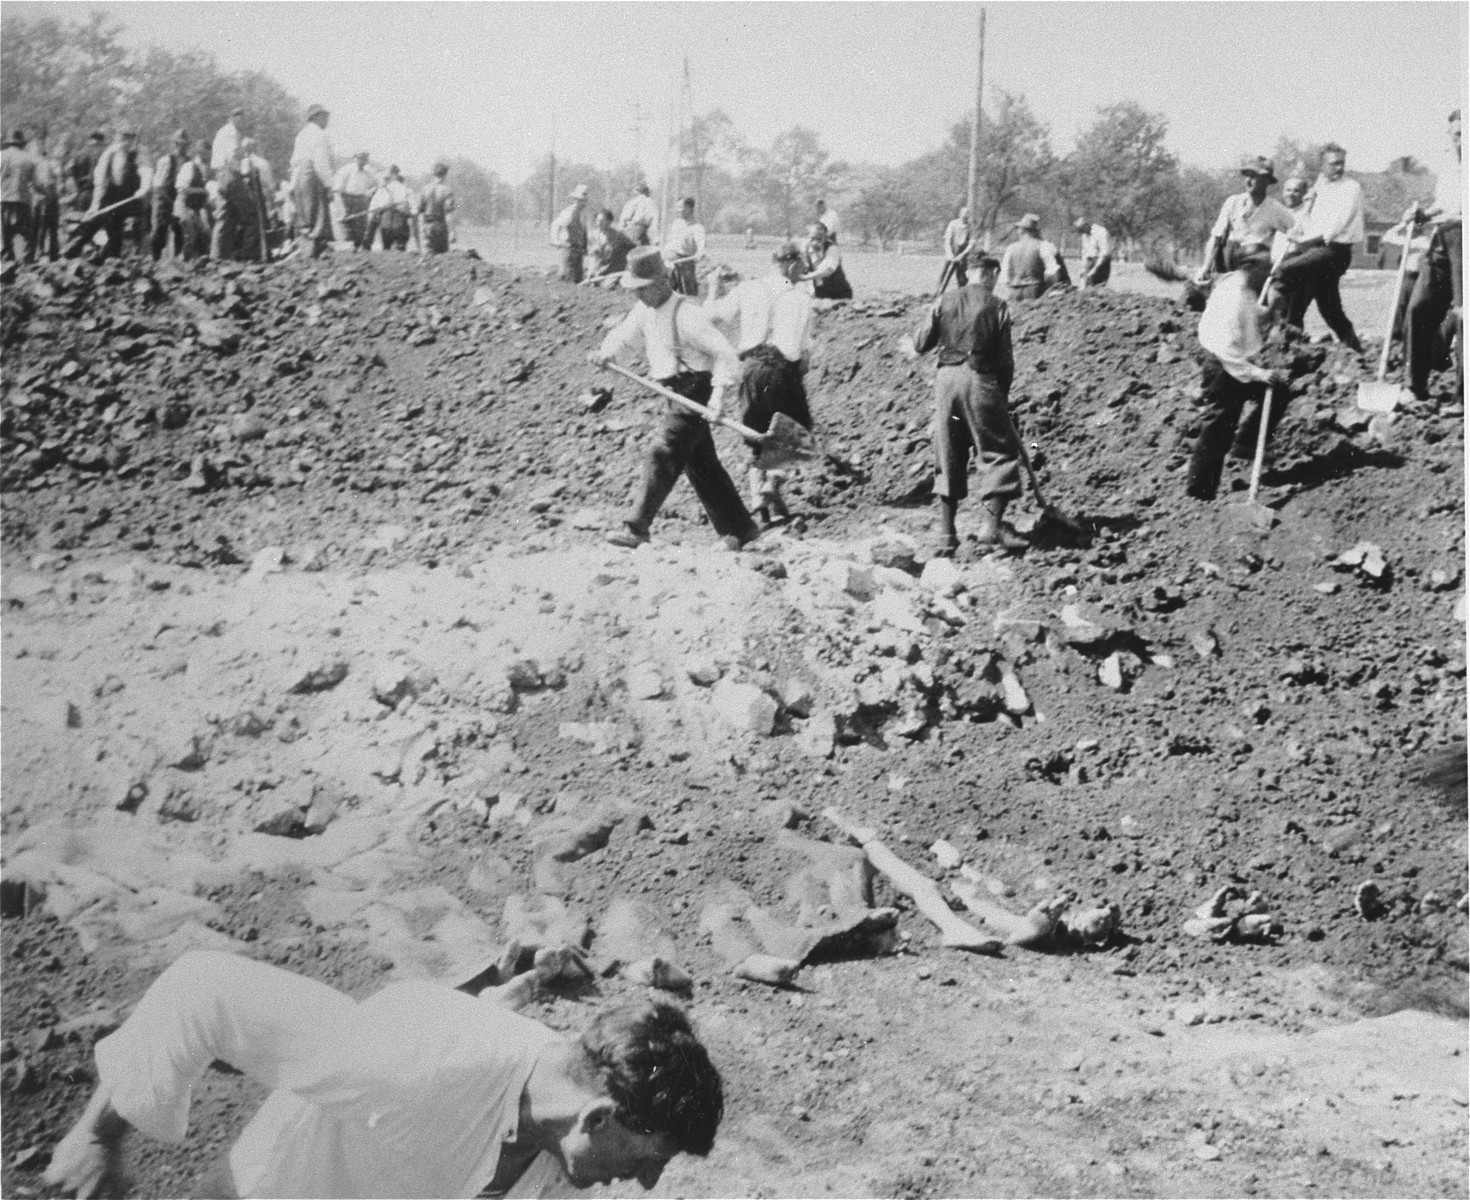 Austrian civilians prepare a mass grave to bury the bodies of former inmates in the Gusen concentration camp.